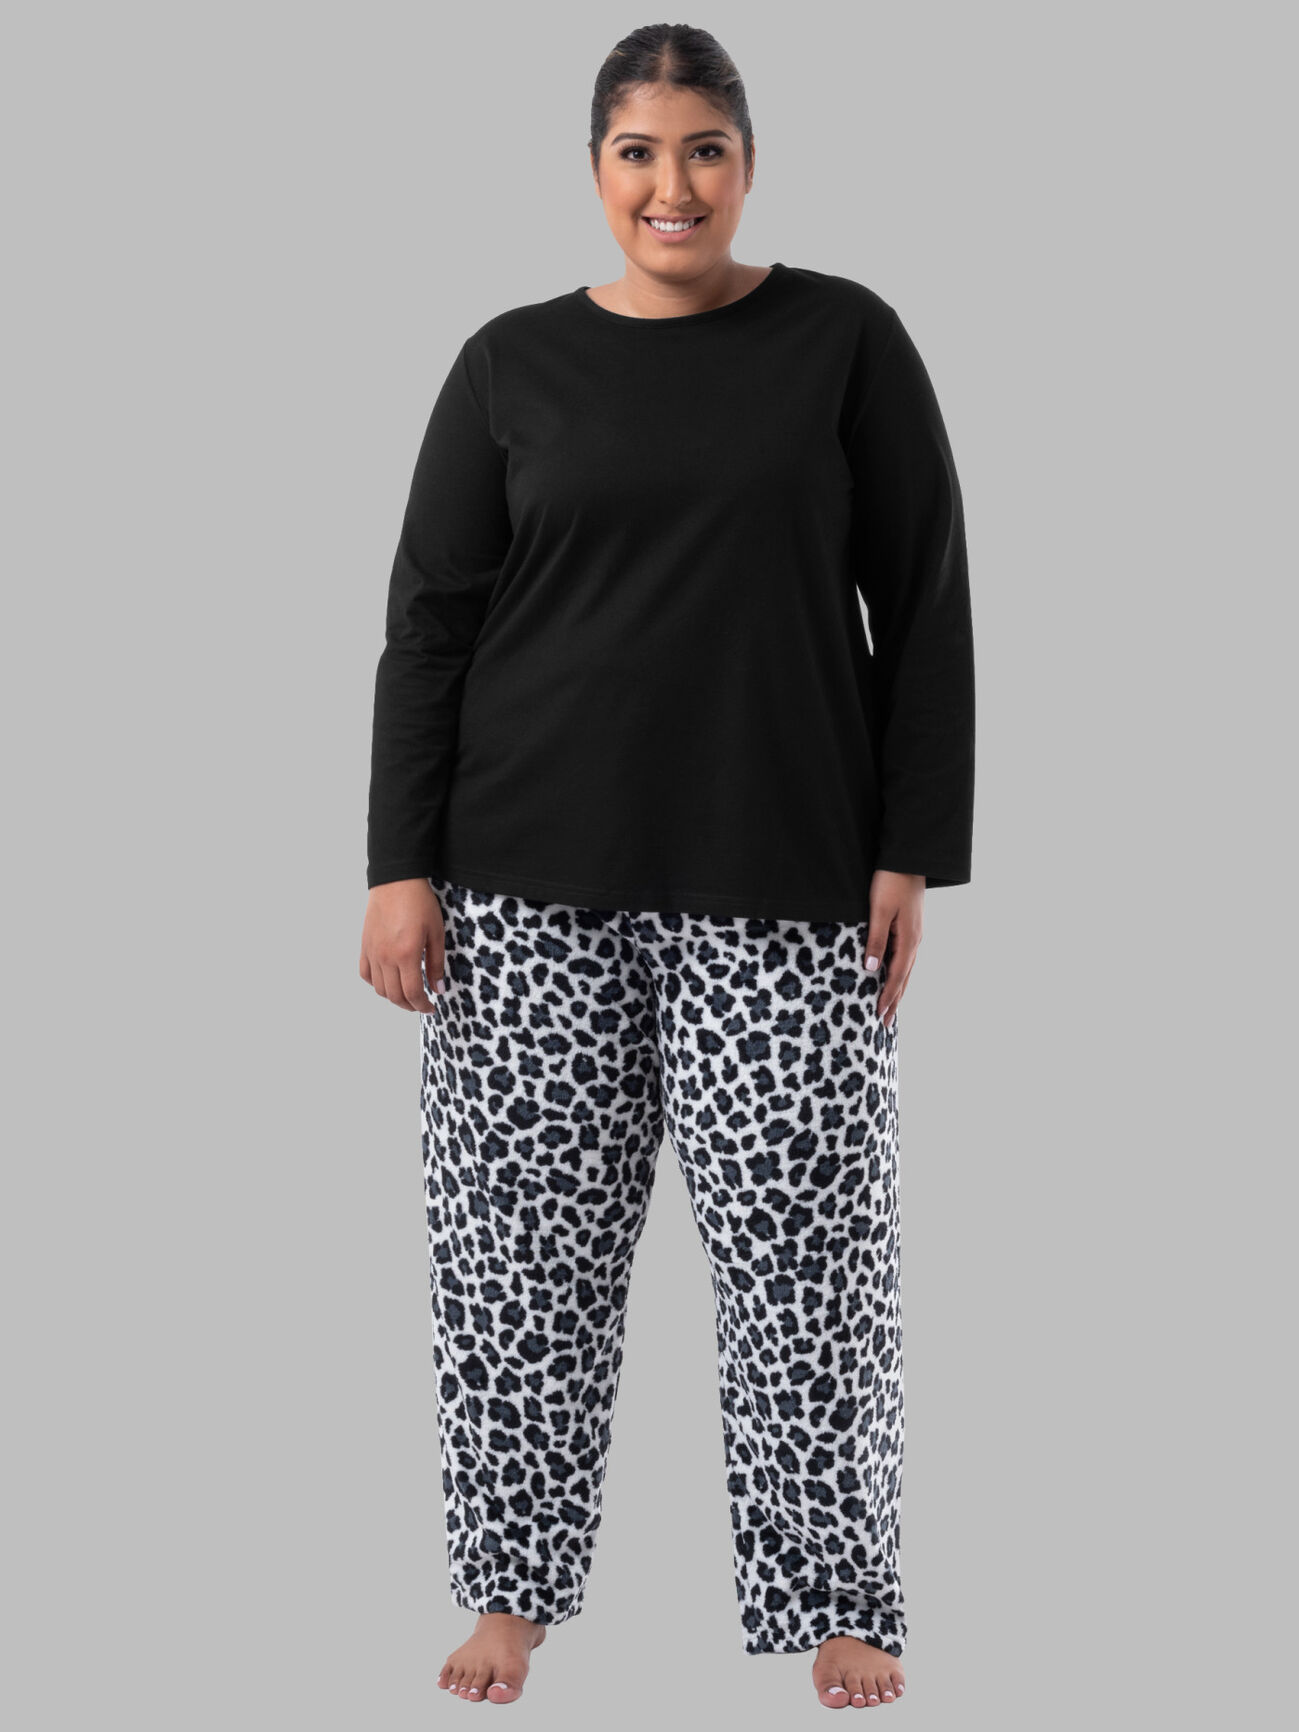 Women's Plus Fit for Me®Fleece Top and Bottom